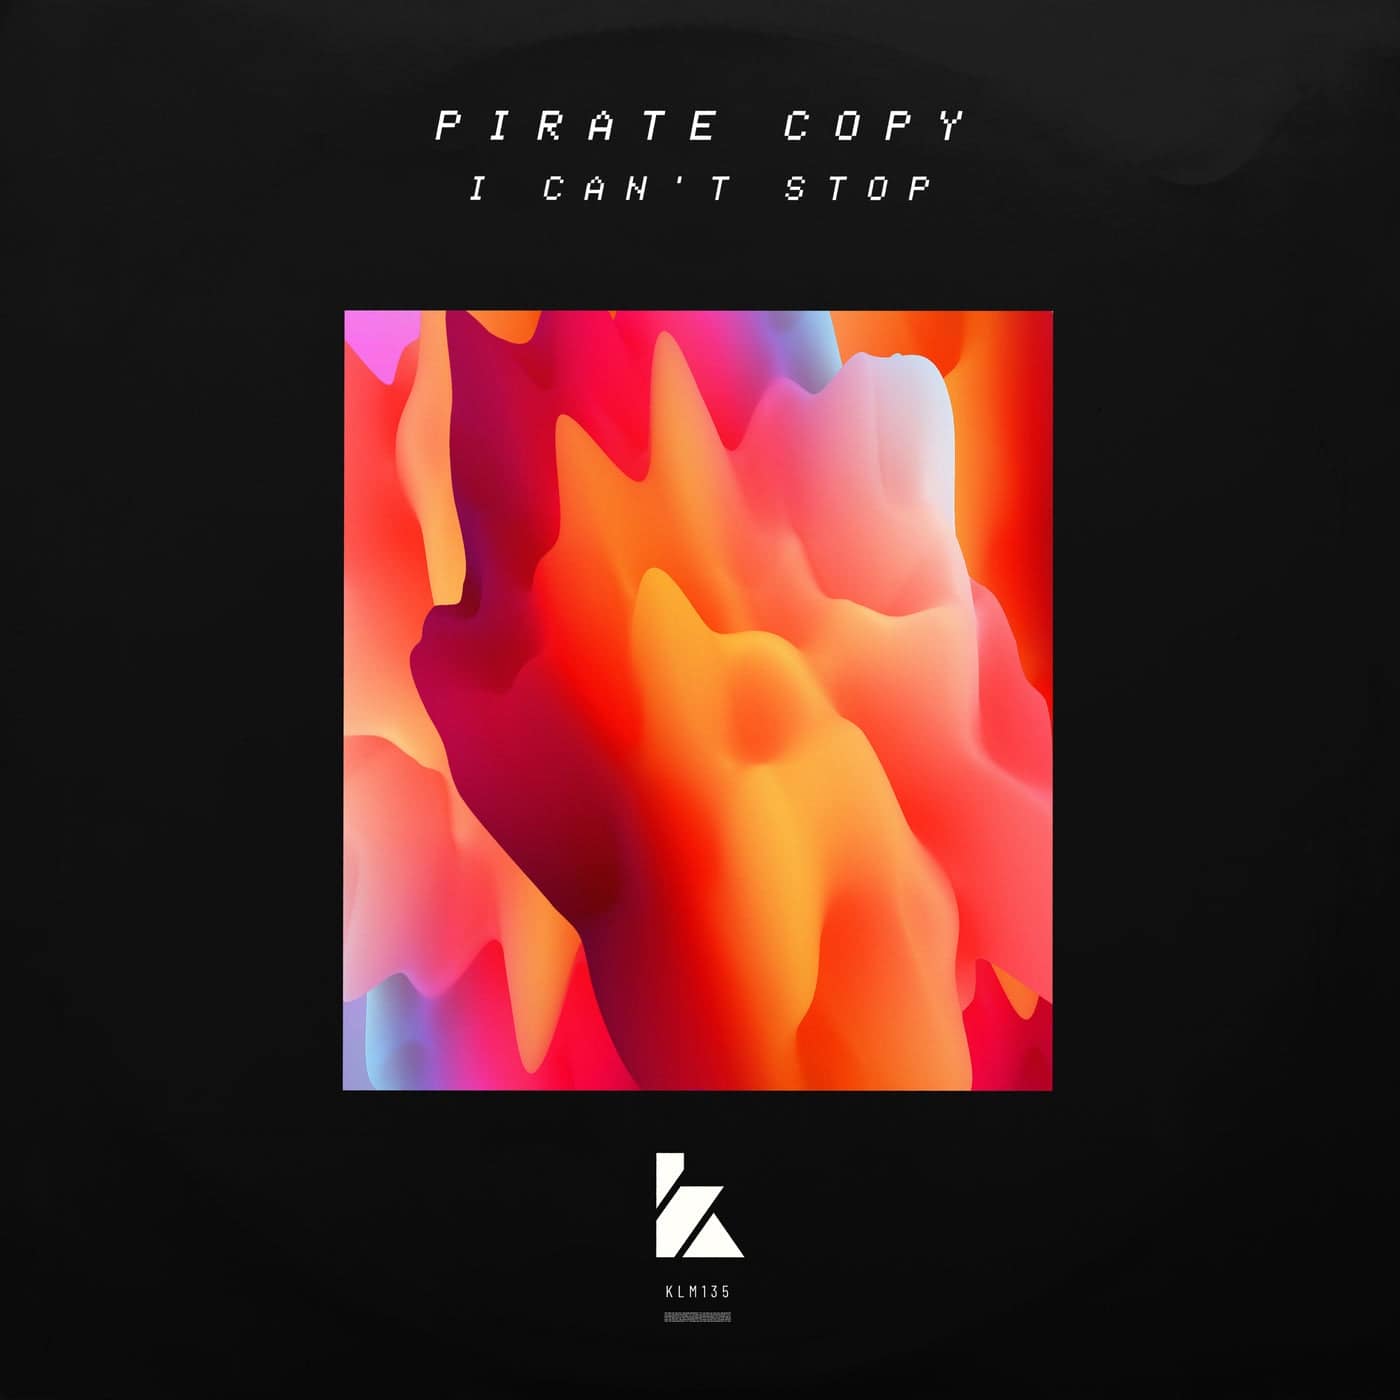 Download Pirate Copy - I Can't Stop on Electrobuzz